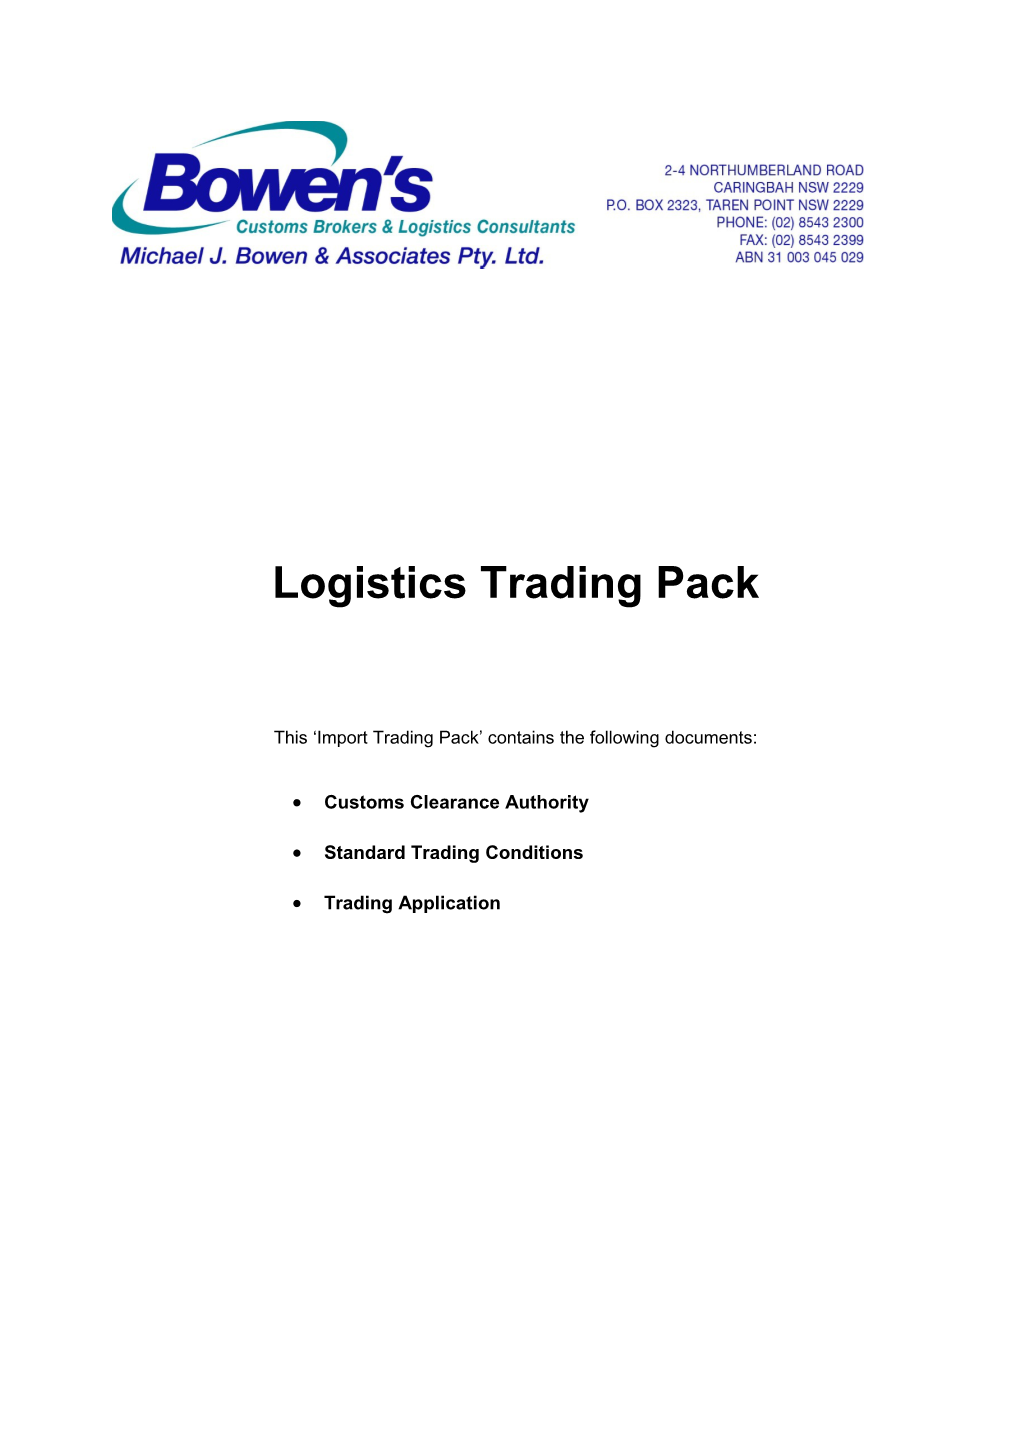 This Import Trading Pack Contains the Following Documents